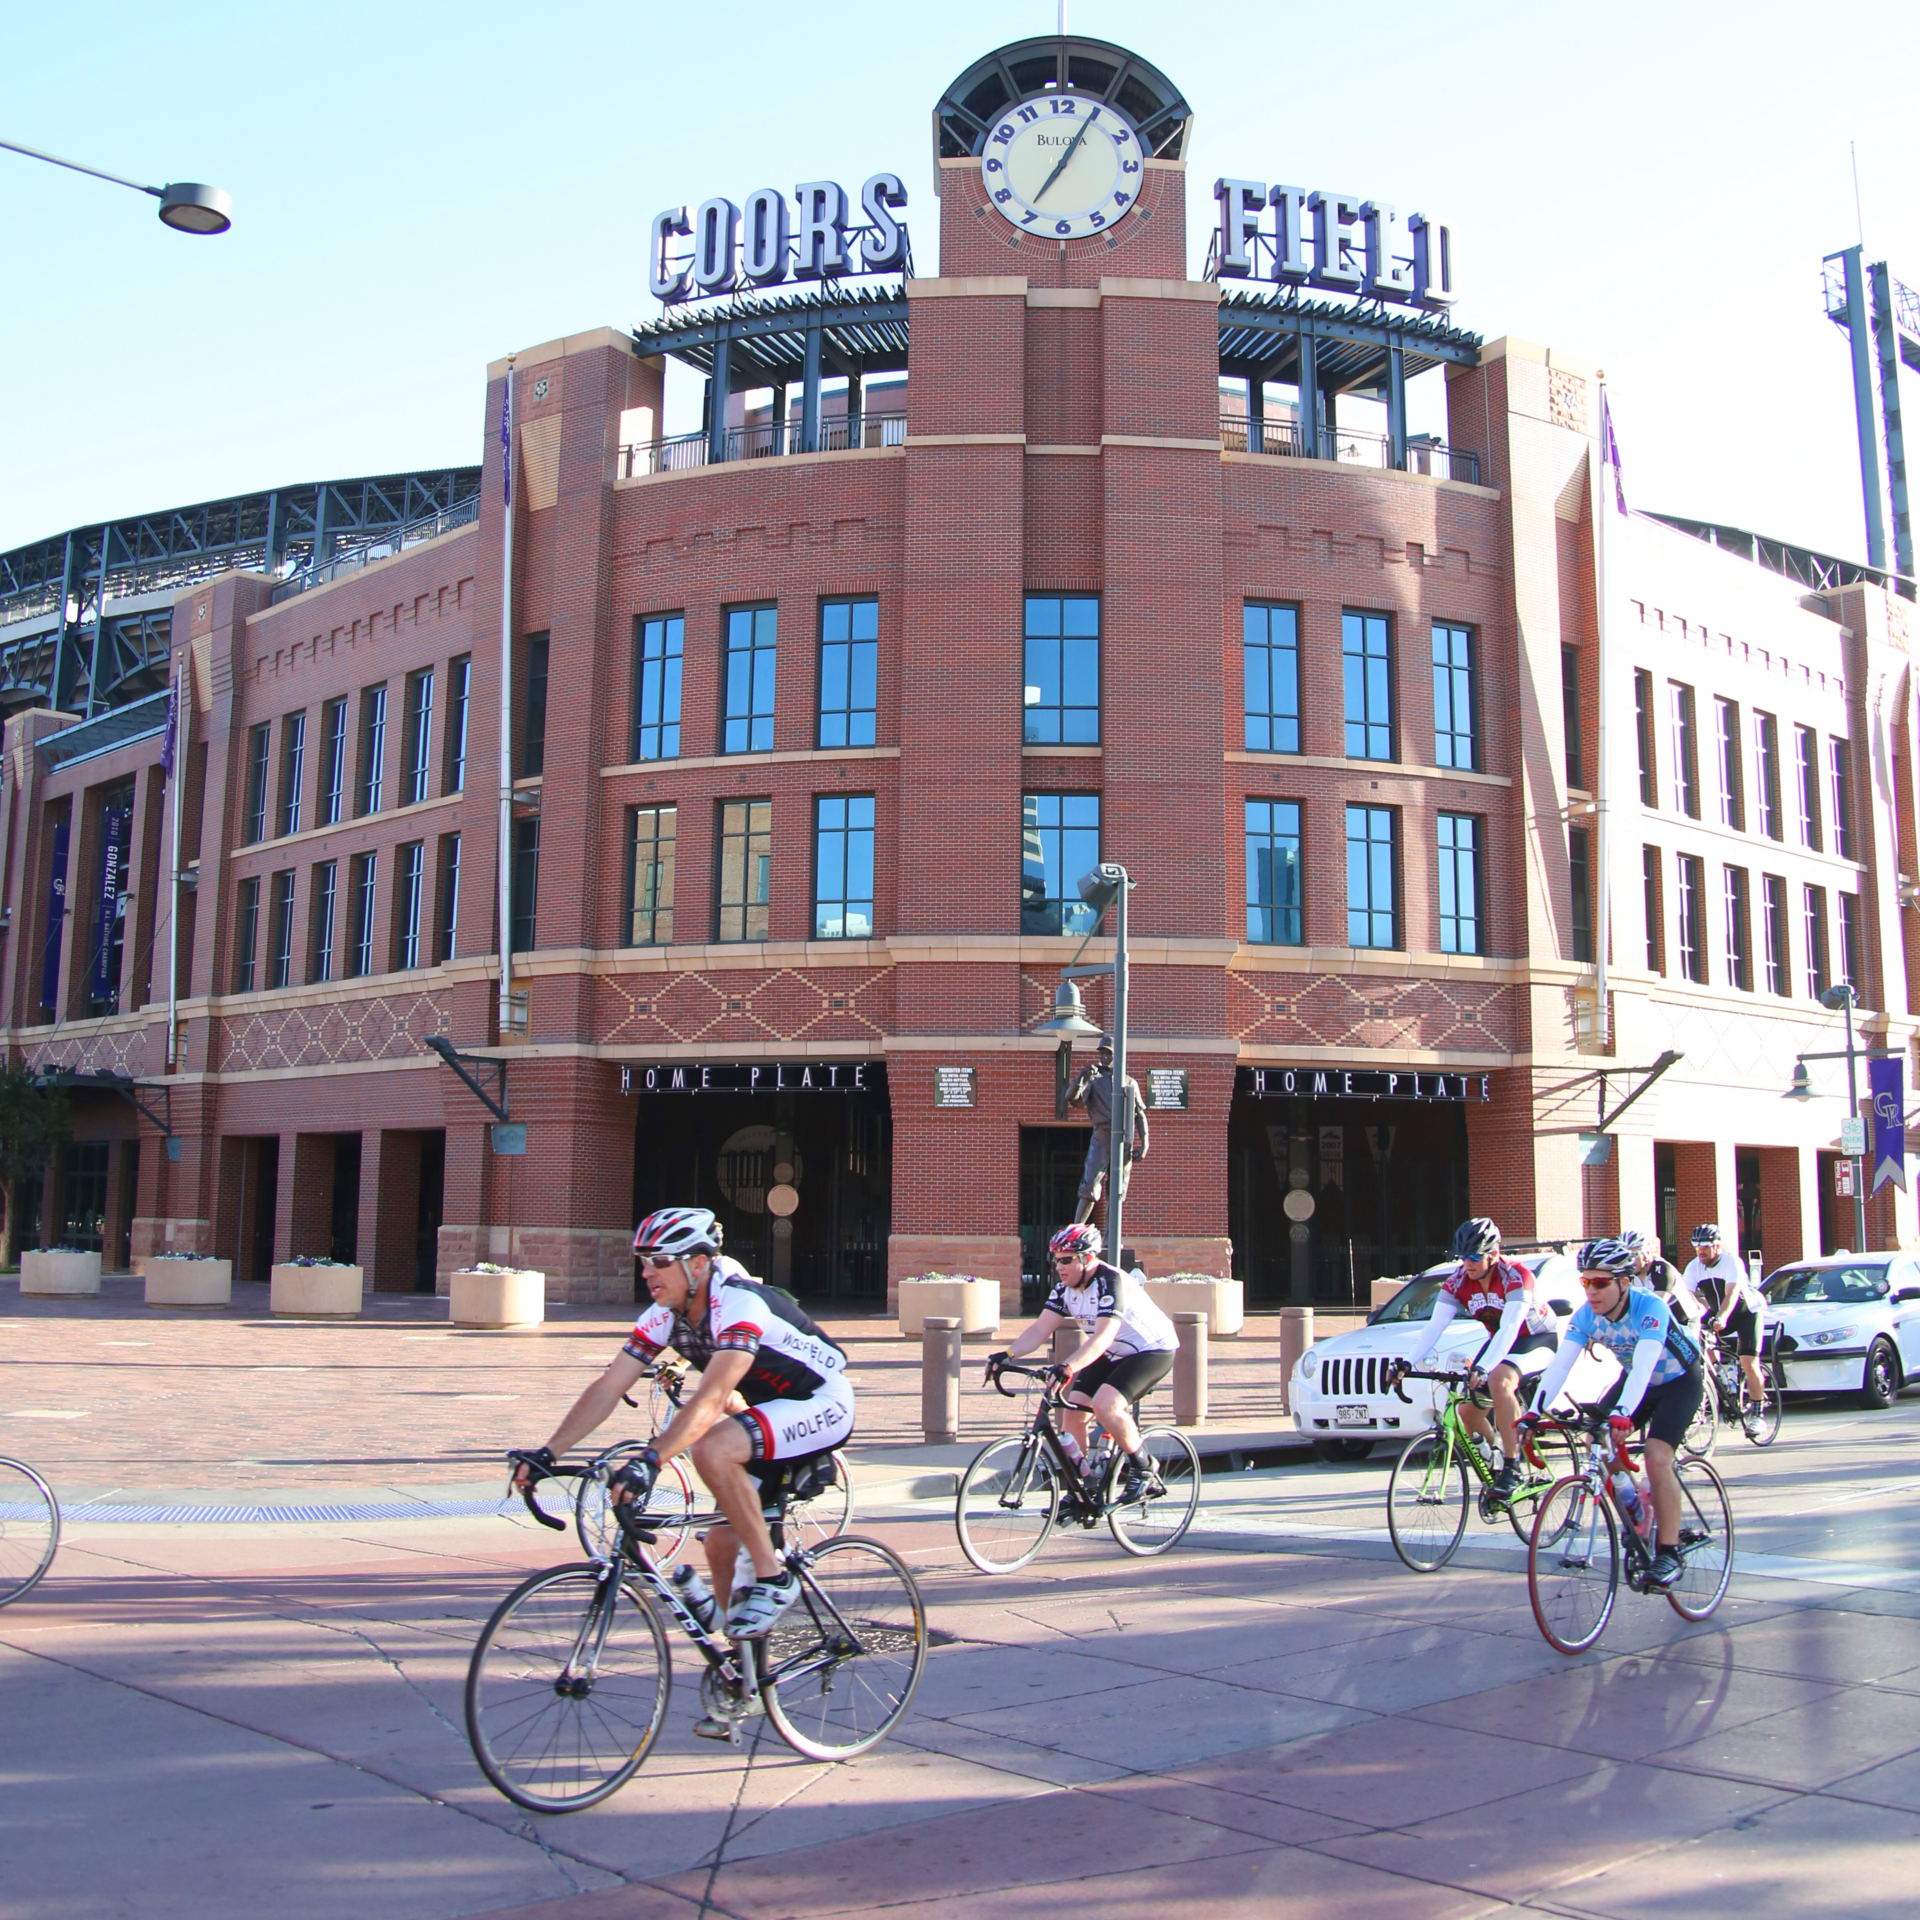 a group of people on bikes rides in front of Coors Field